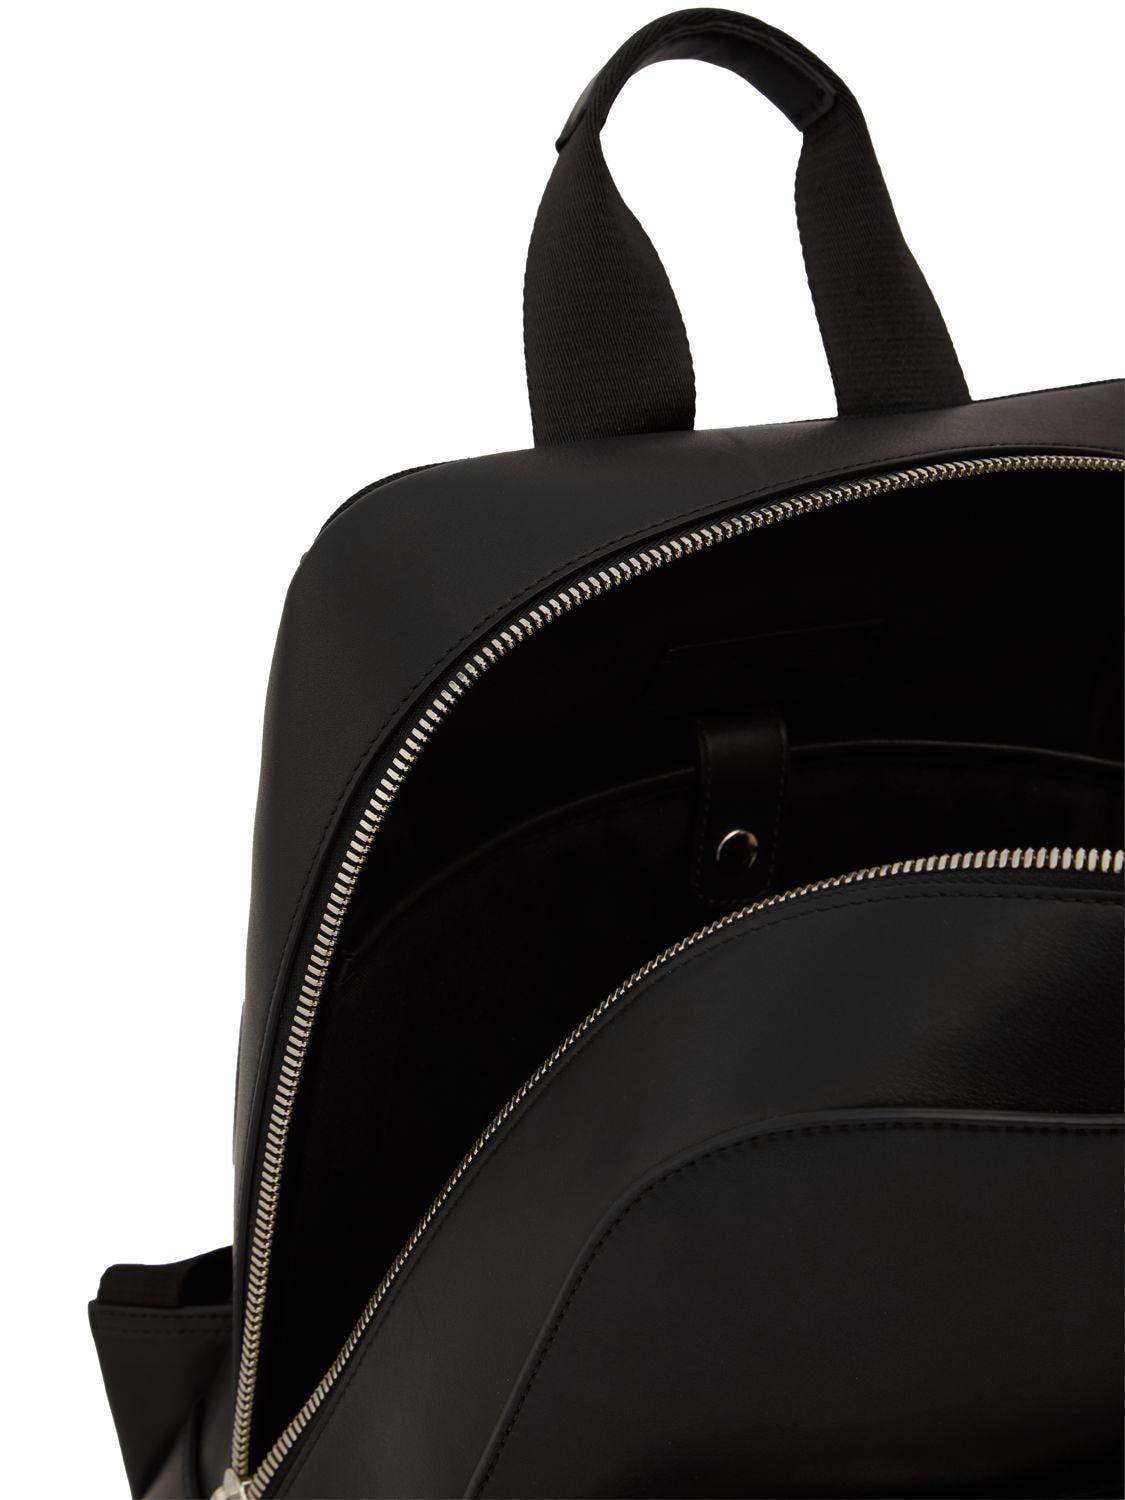 DSquared² Dc Leather Backpack in Black for Men | Lyst